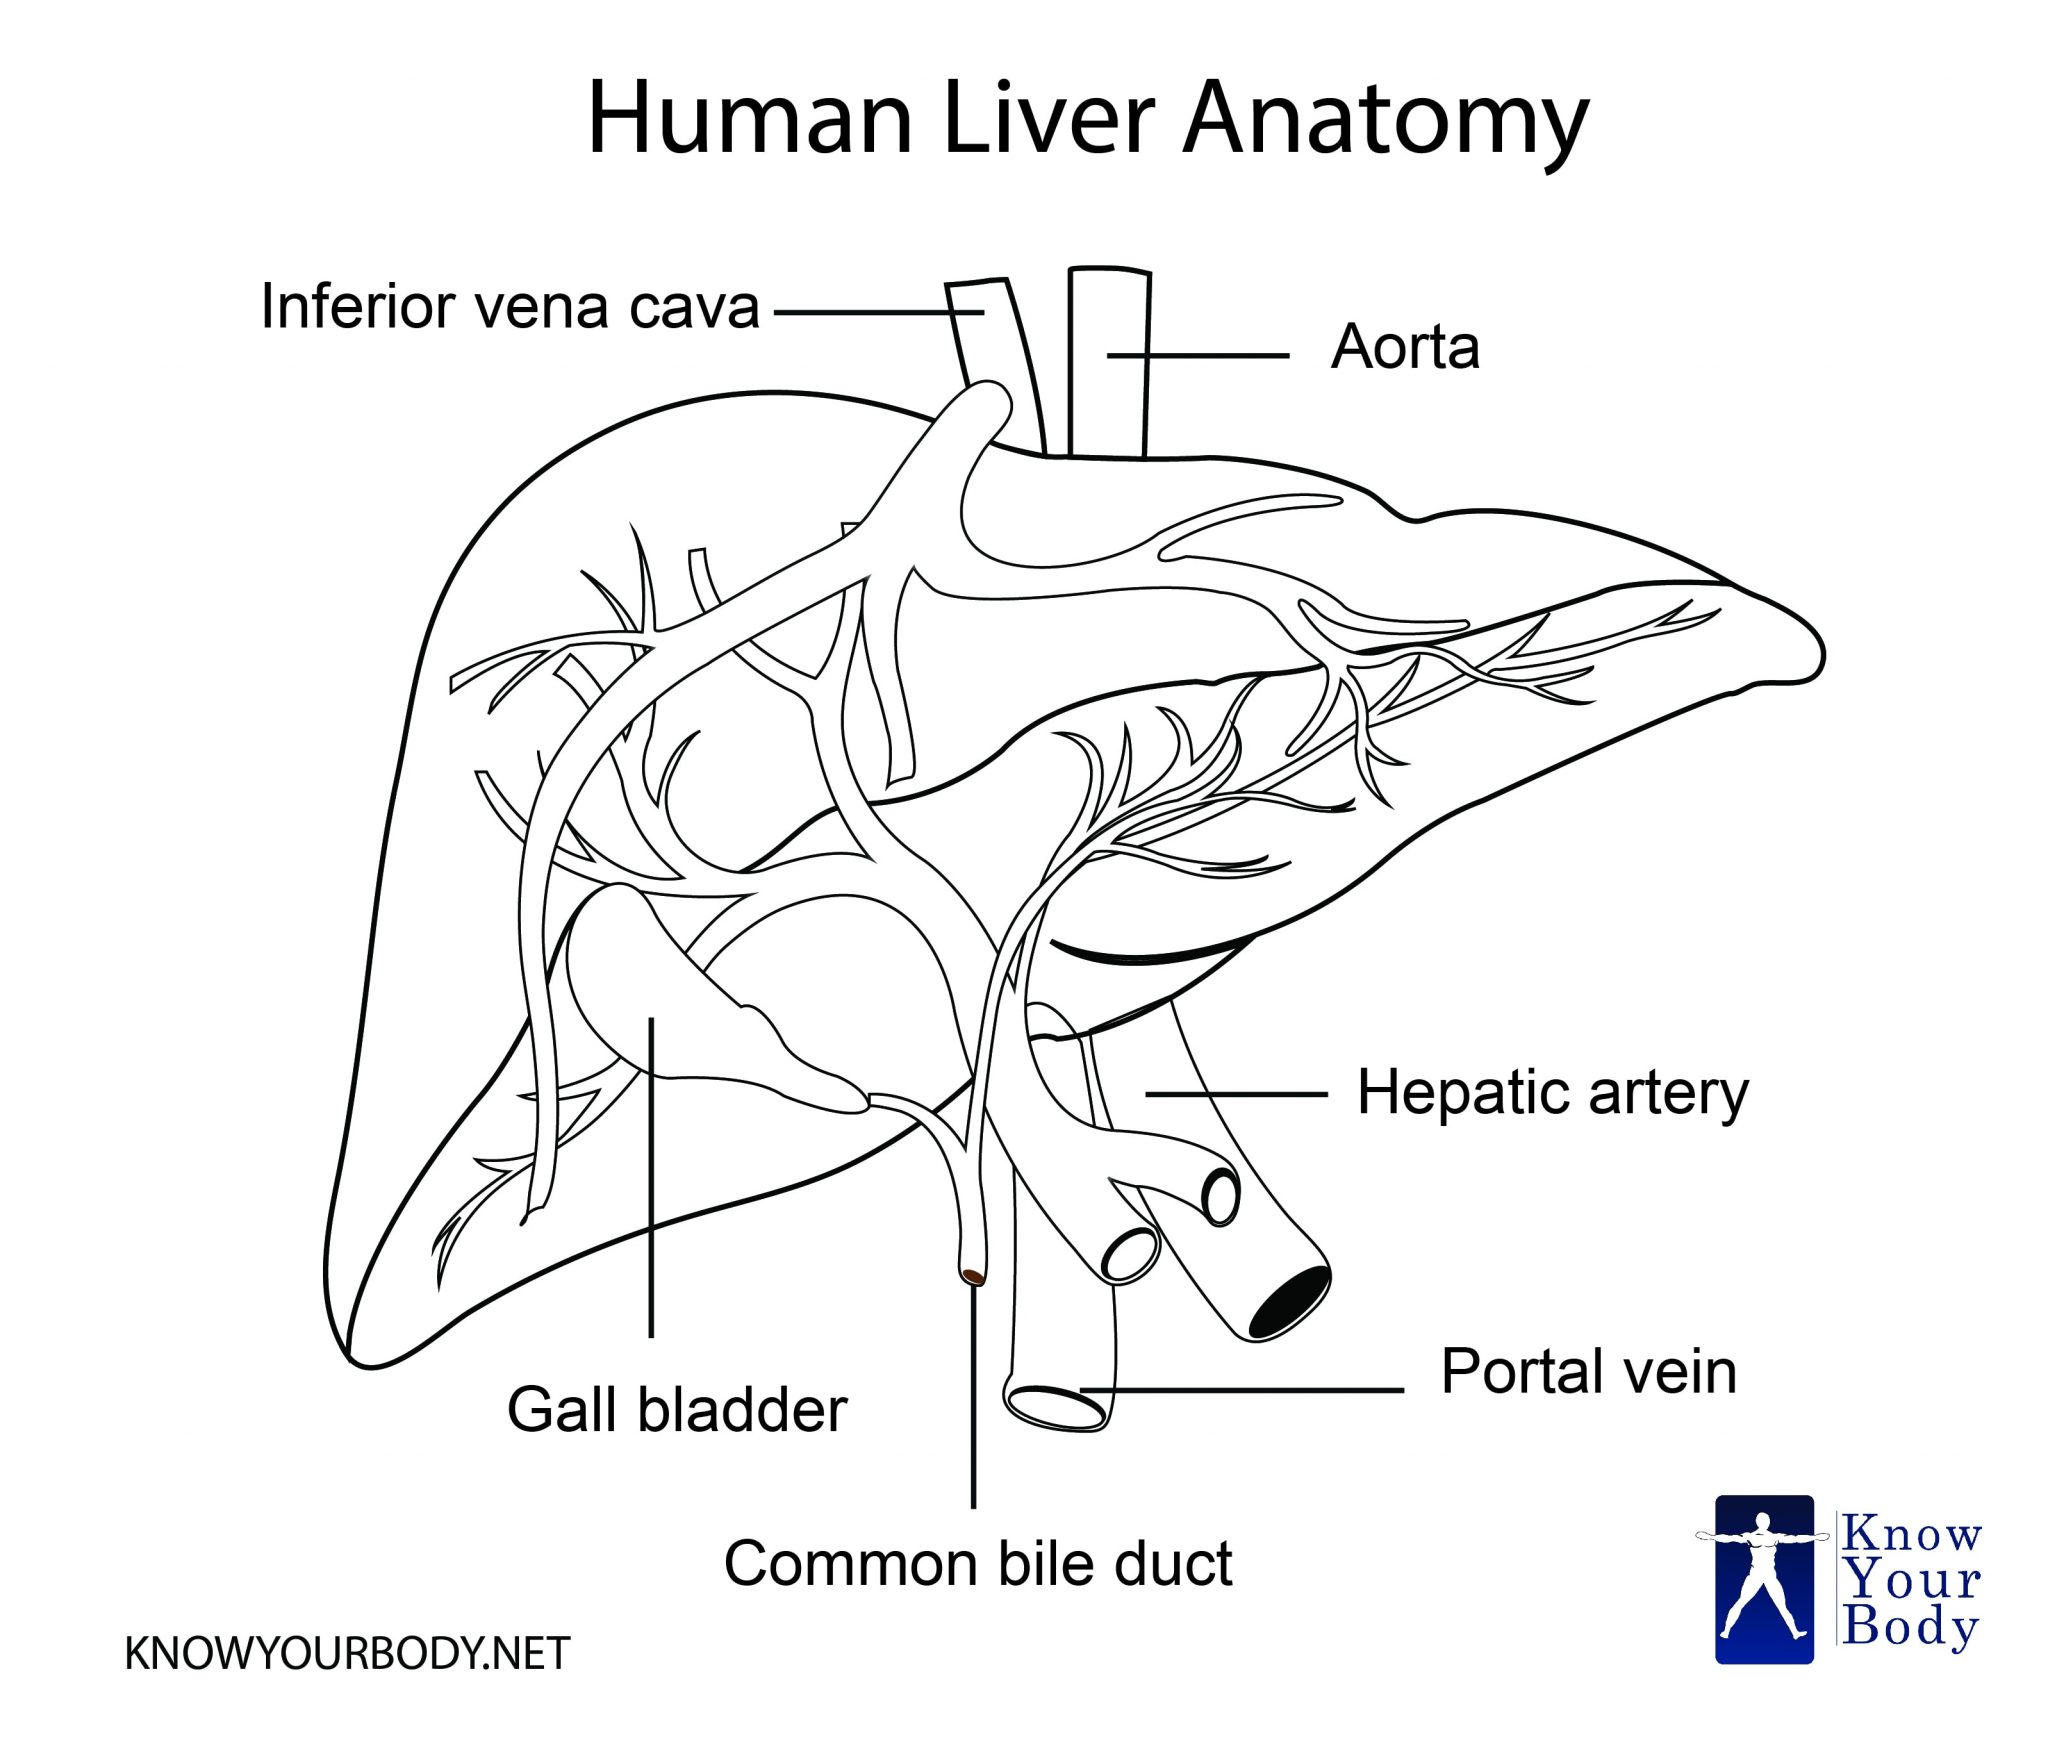 Liver Location, Functions, Anatomy, Pictures, and FAQs